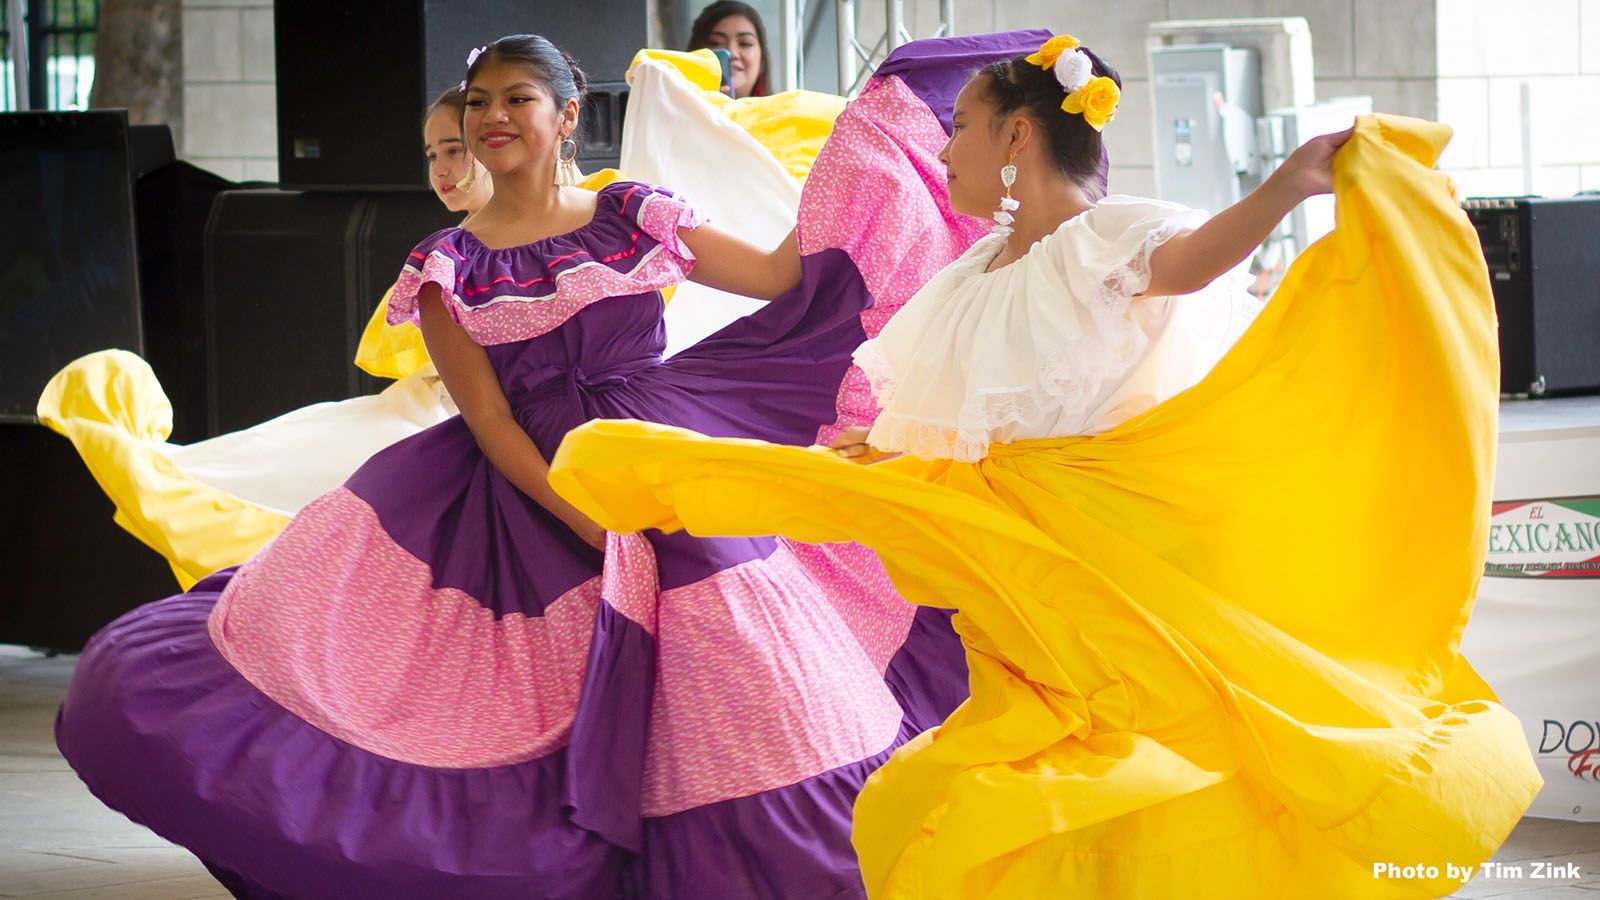 There will be plenty of dancing when Fiesta Fort Wayne returns to Headwaters Park on Aug. 12.